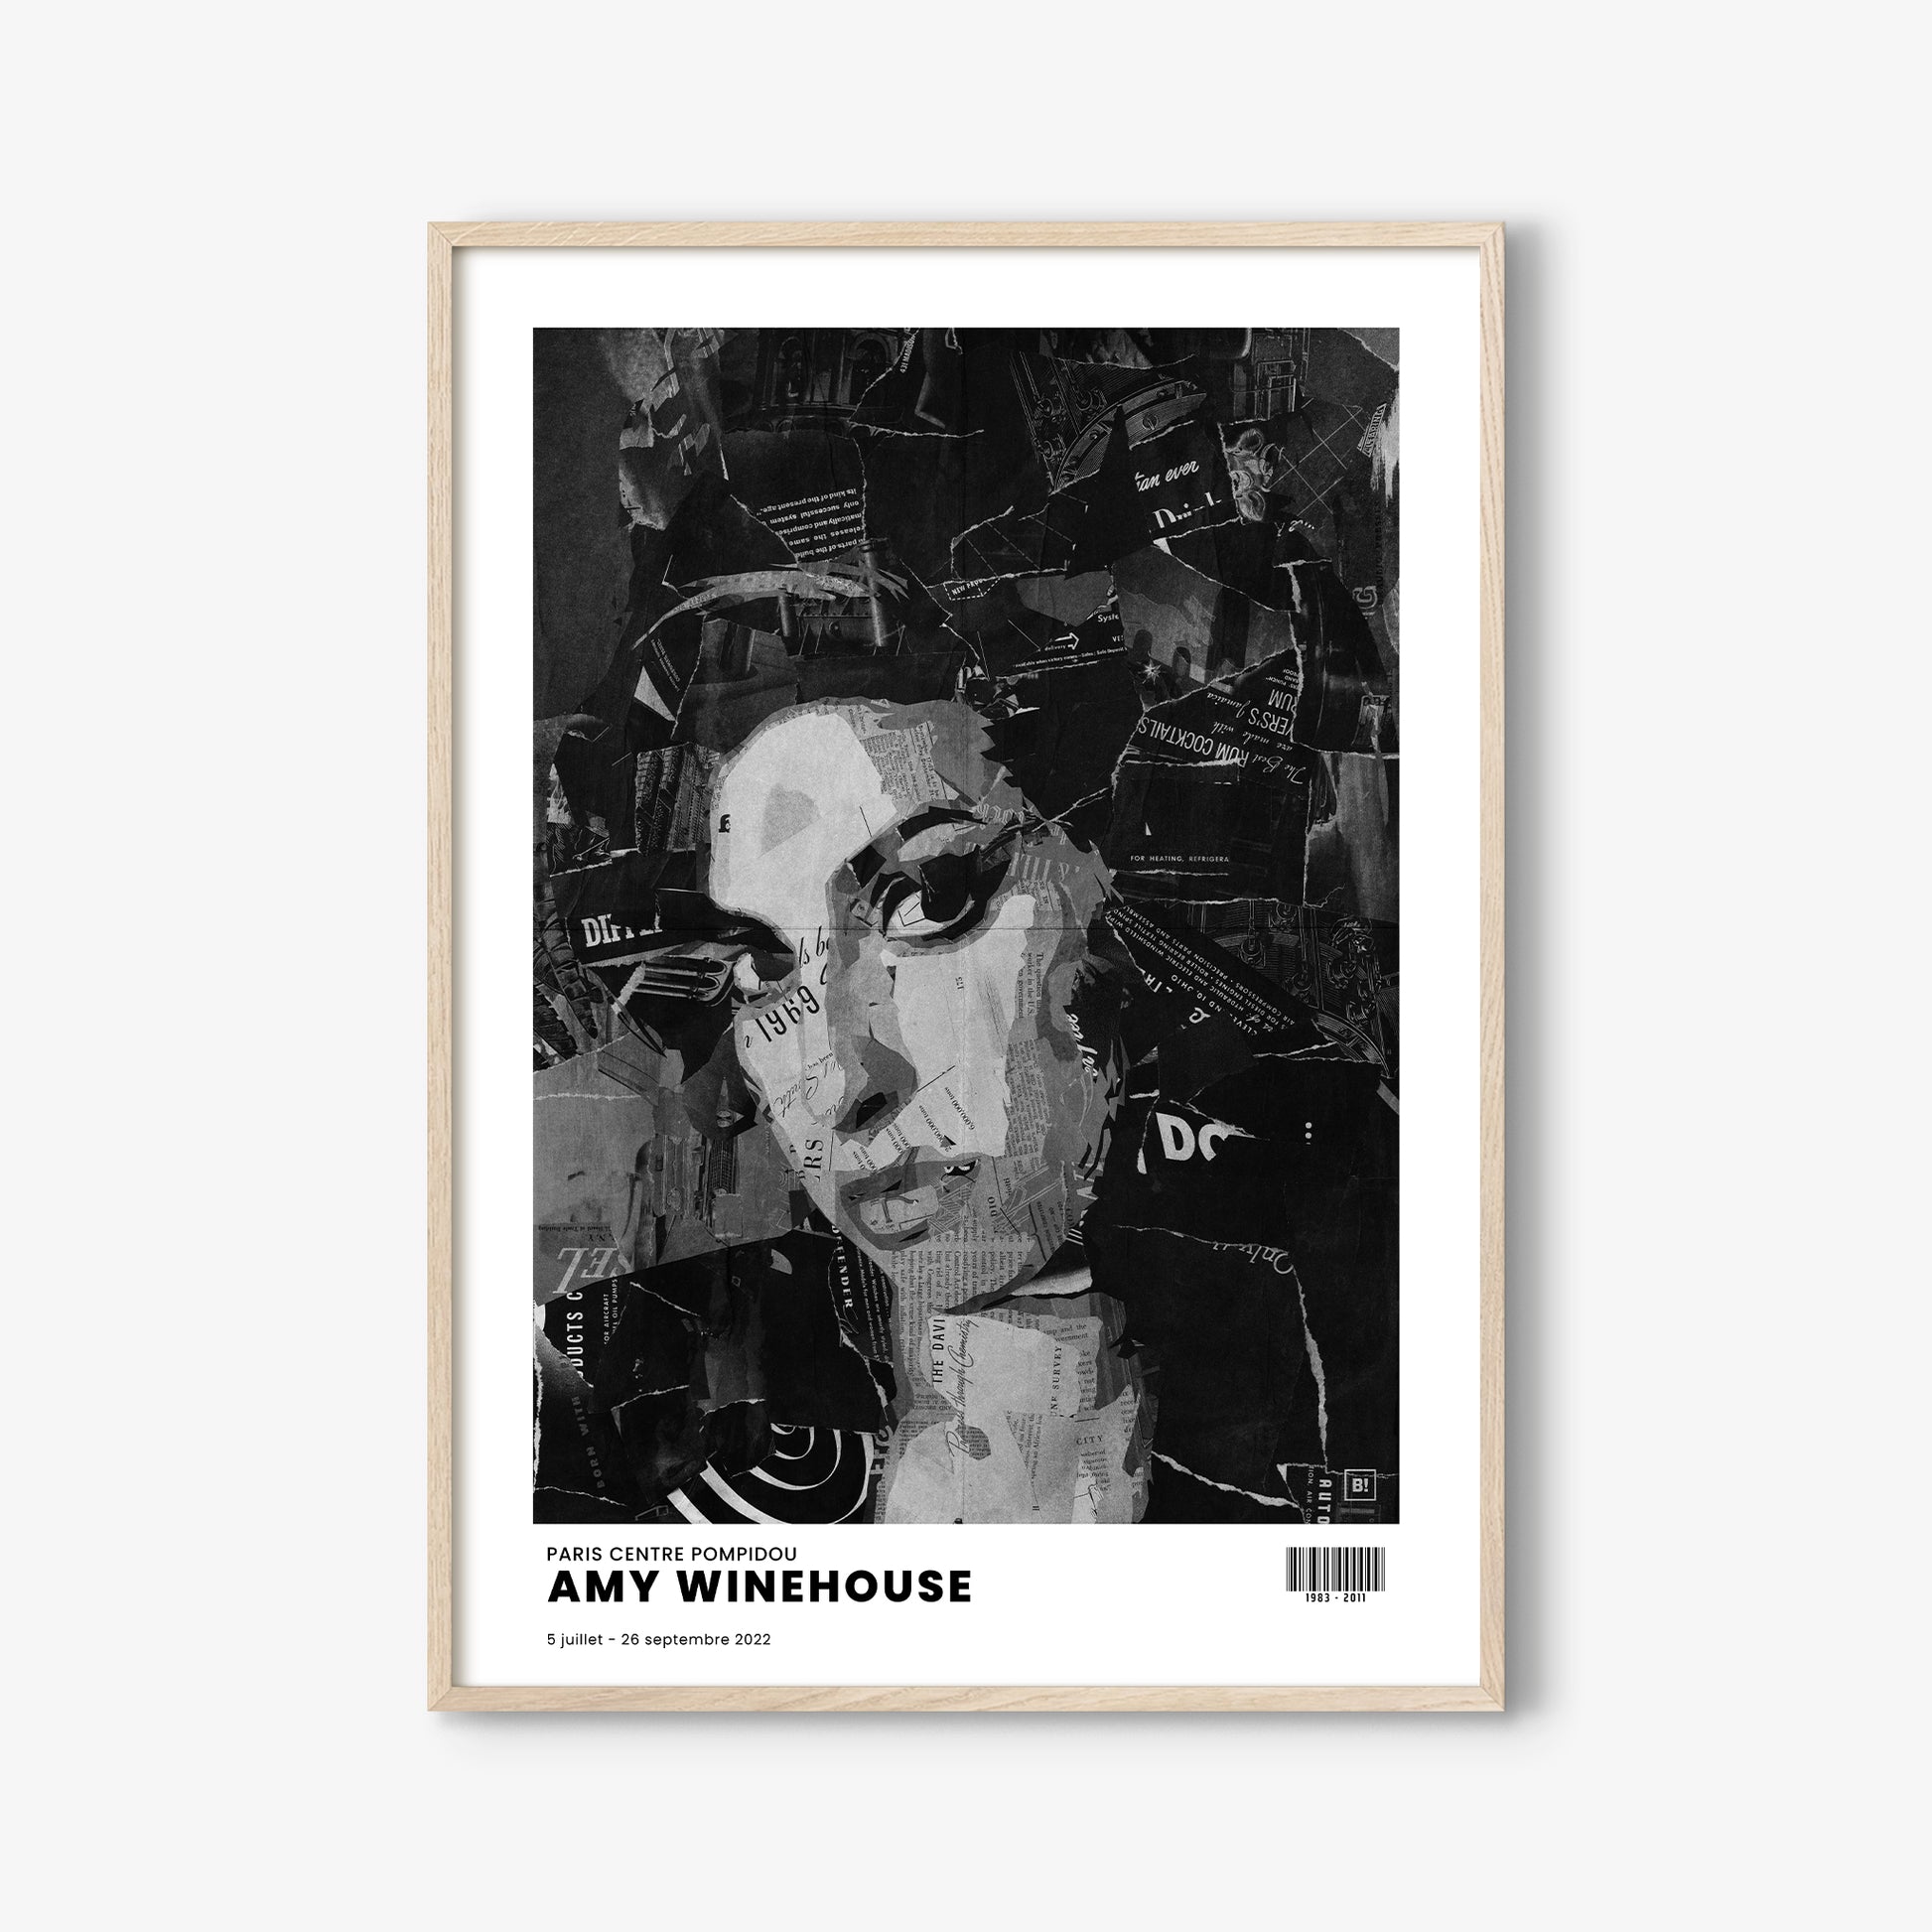 Be inspired by Iconic Amy Winehouse Paris Centre Pompidou Exhibition Art Print. The artwork is presented in a white oak frame that captures its timeless beauty in every detail.